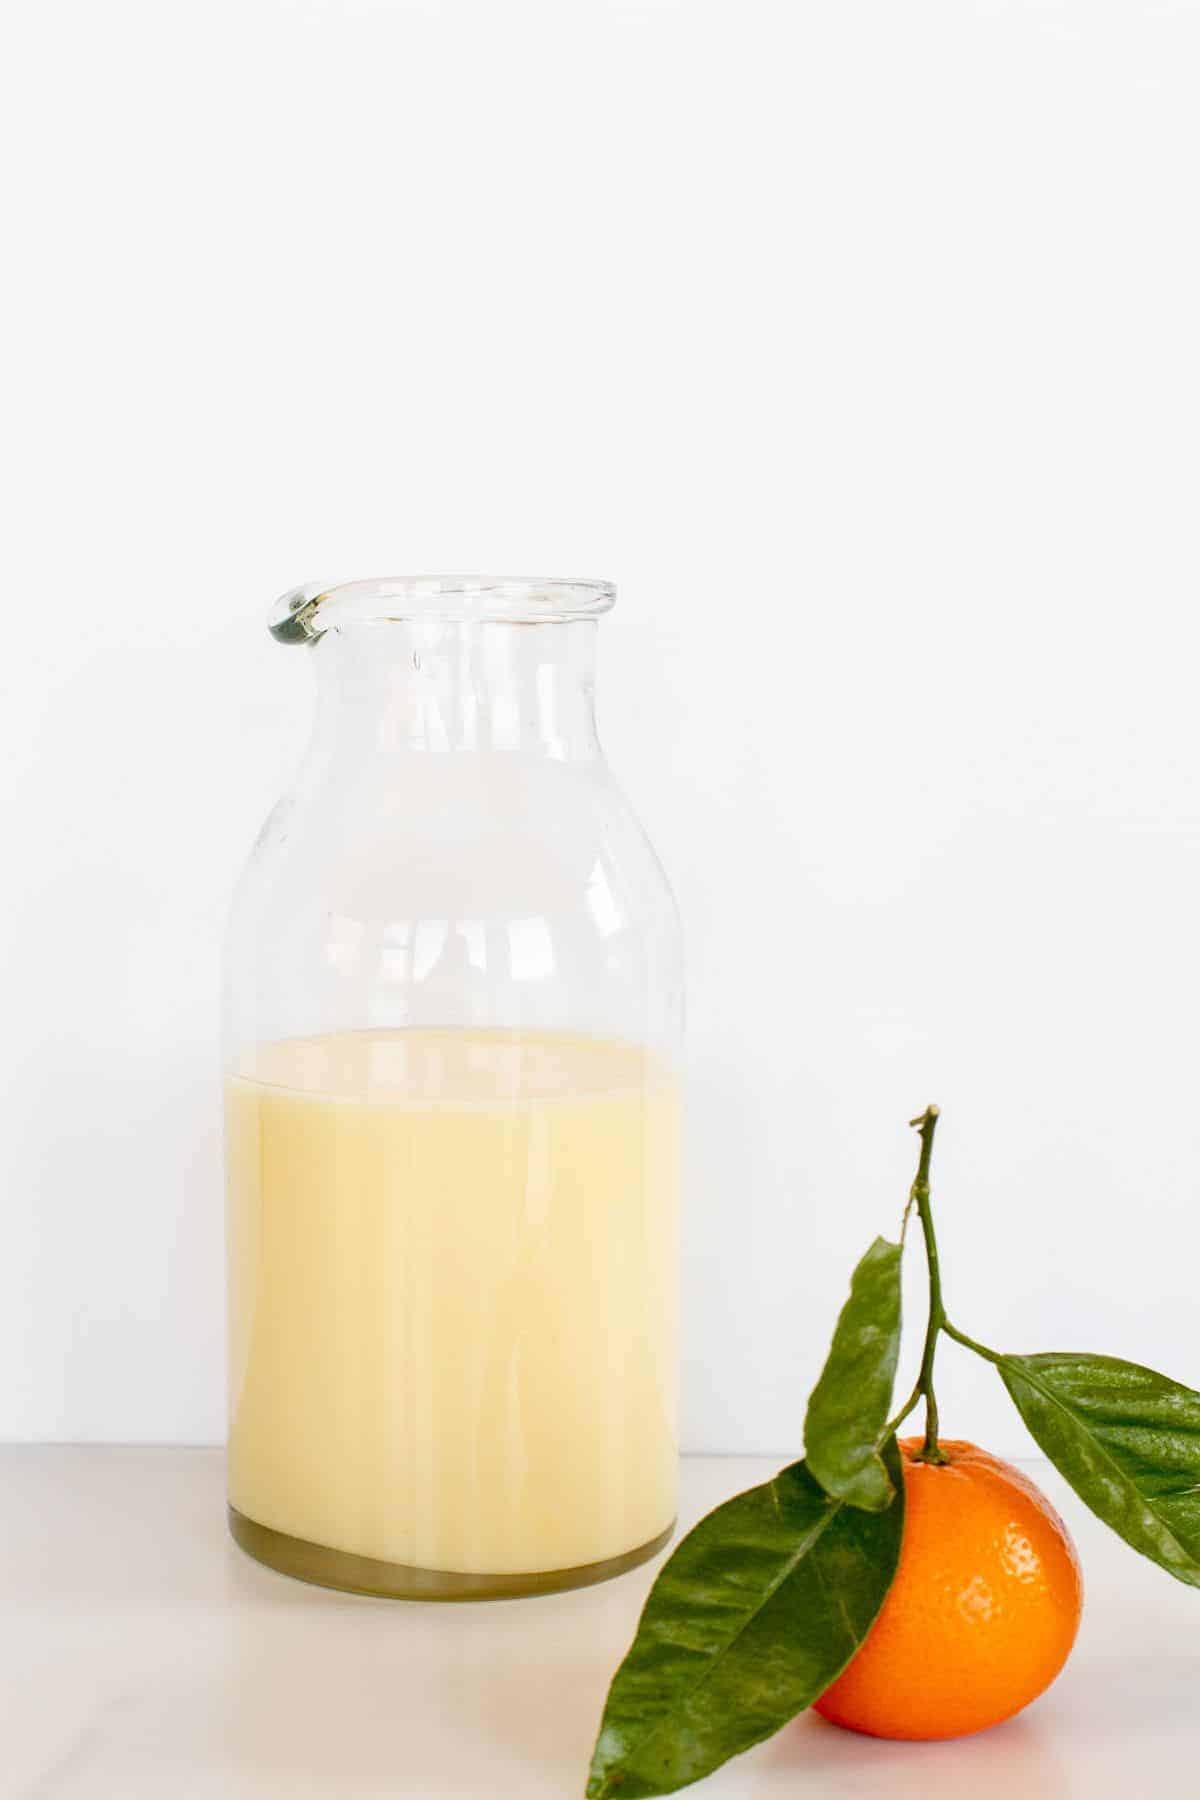 A glass container full of orange glaze, with a fresh orange resting next to it on a marble surface.